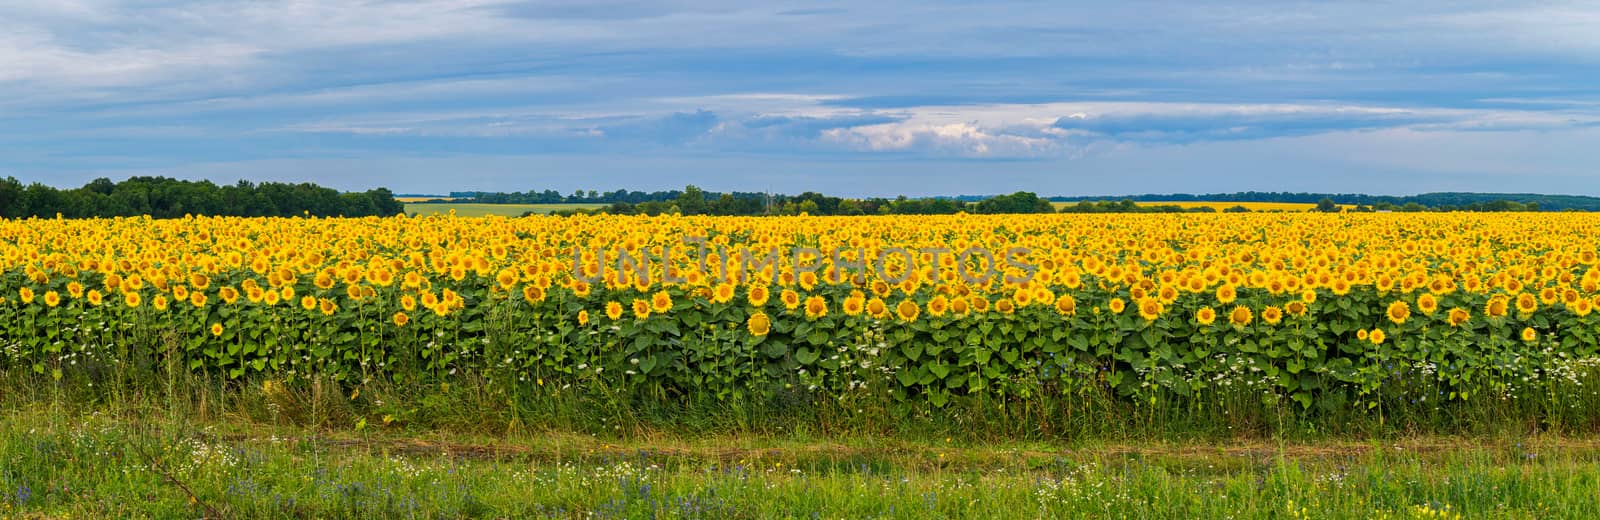 A field full of bright yellow sunflowers with high green stems against a clear blue sky by Adamchuk